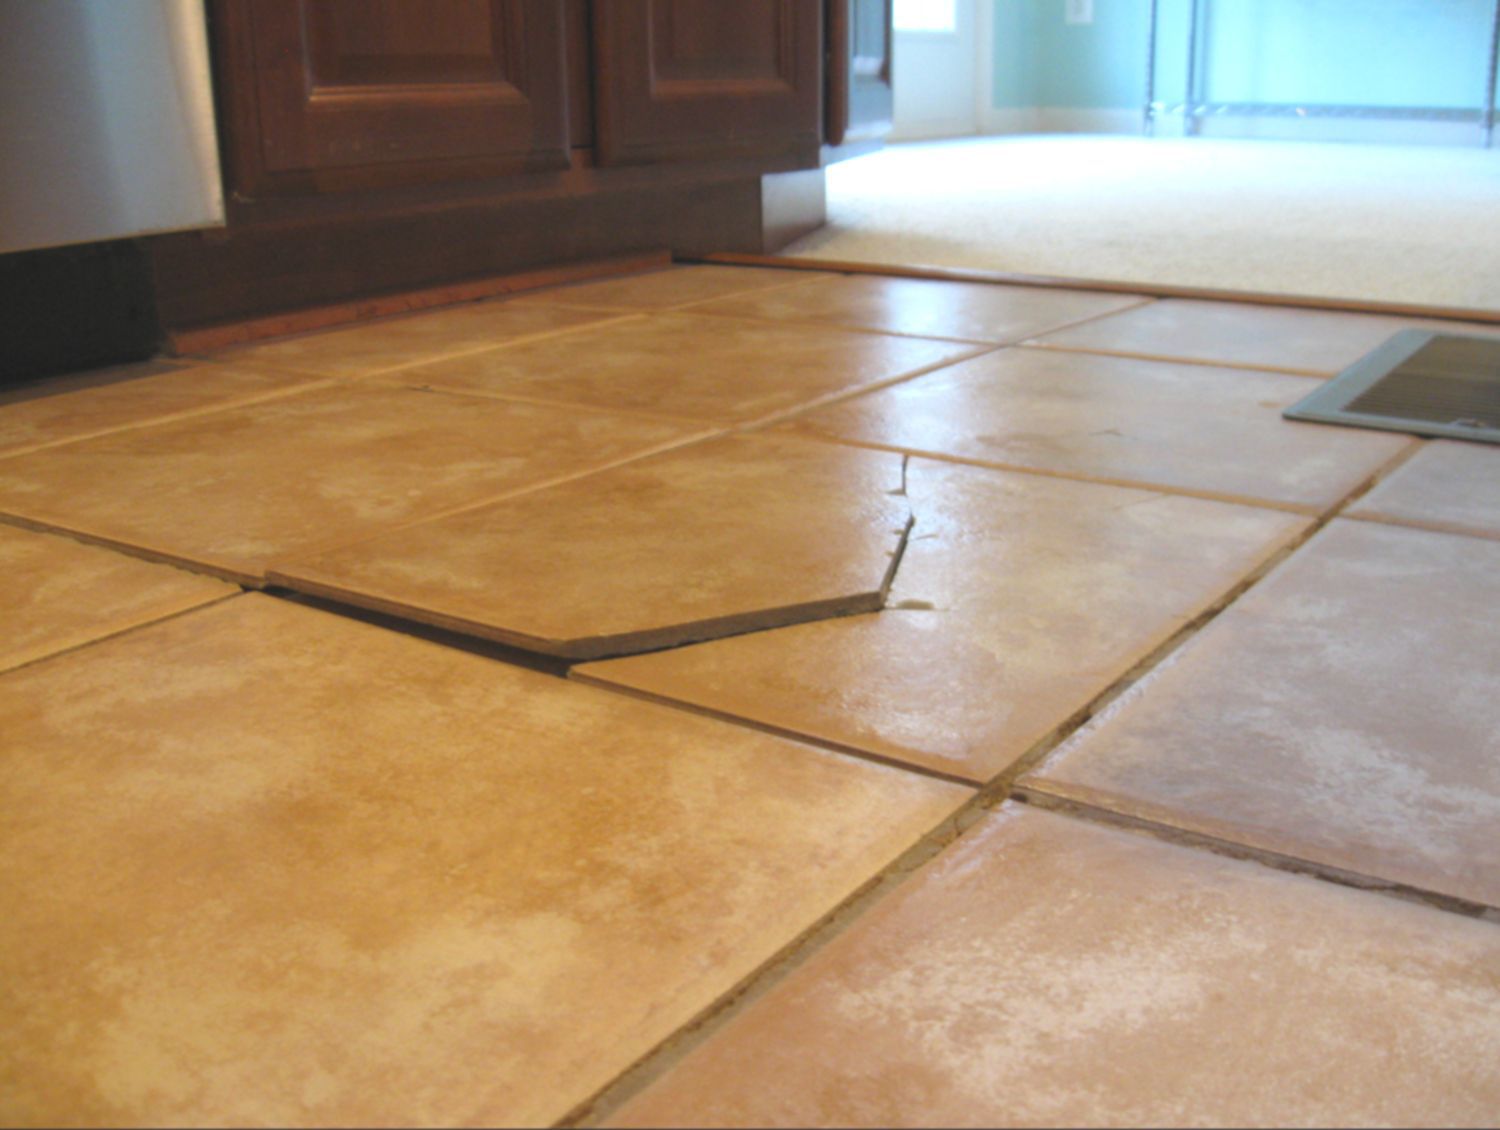 Four common causes for floor damage in the home